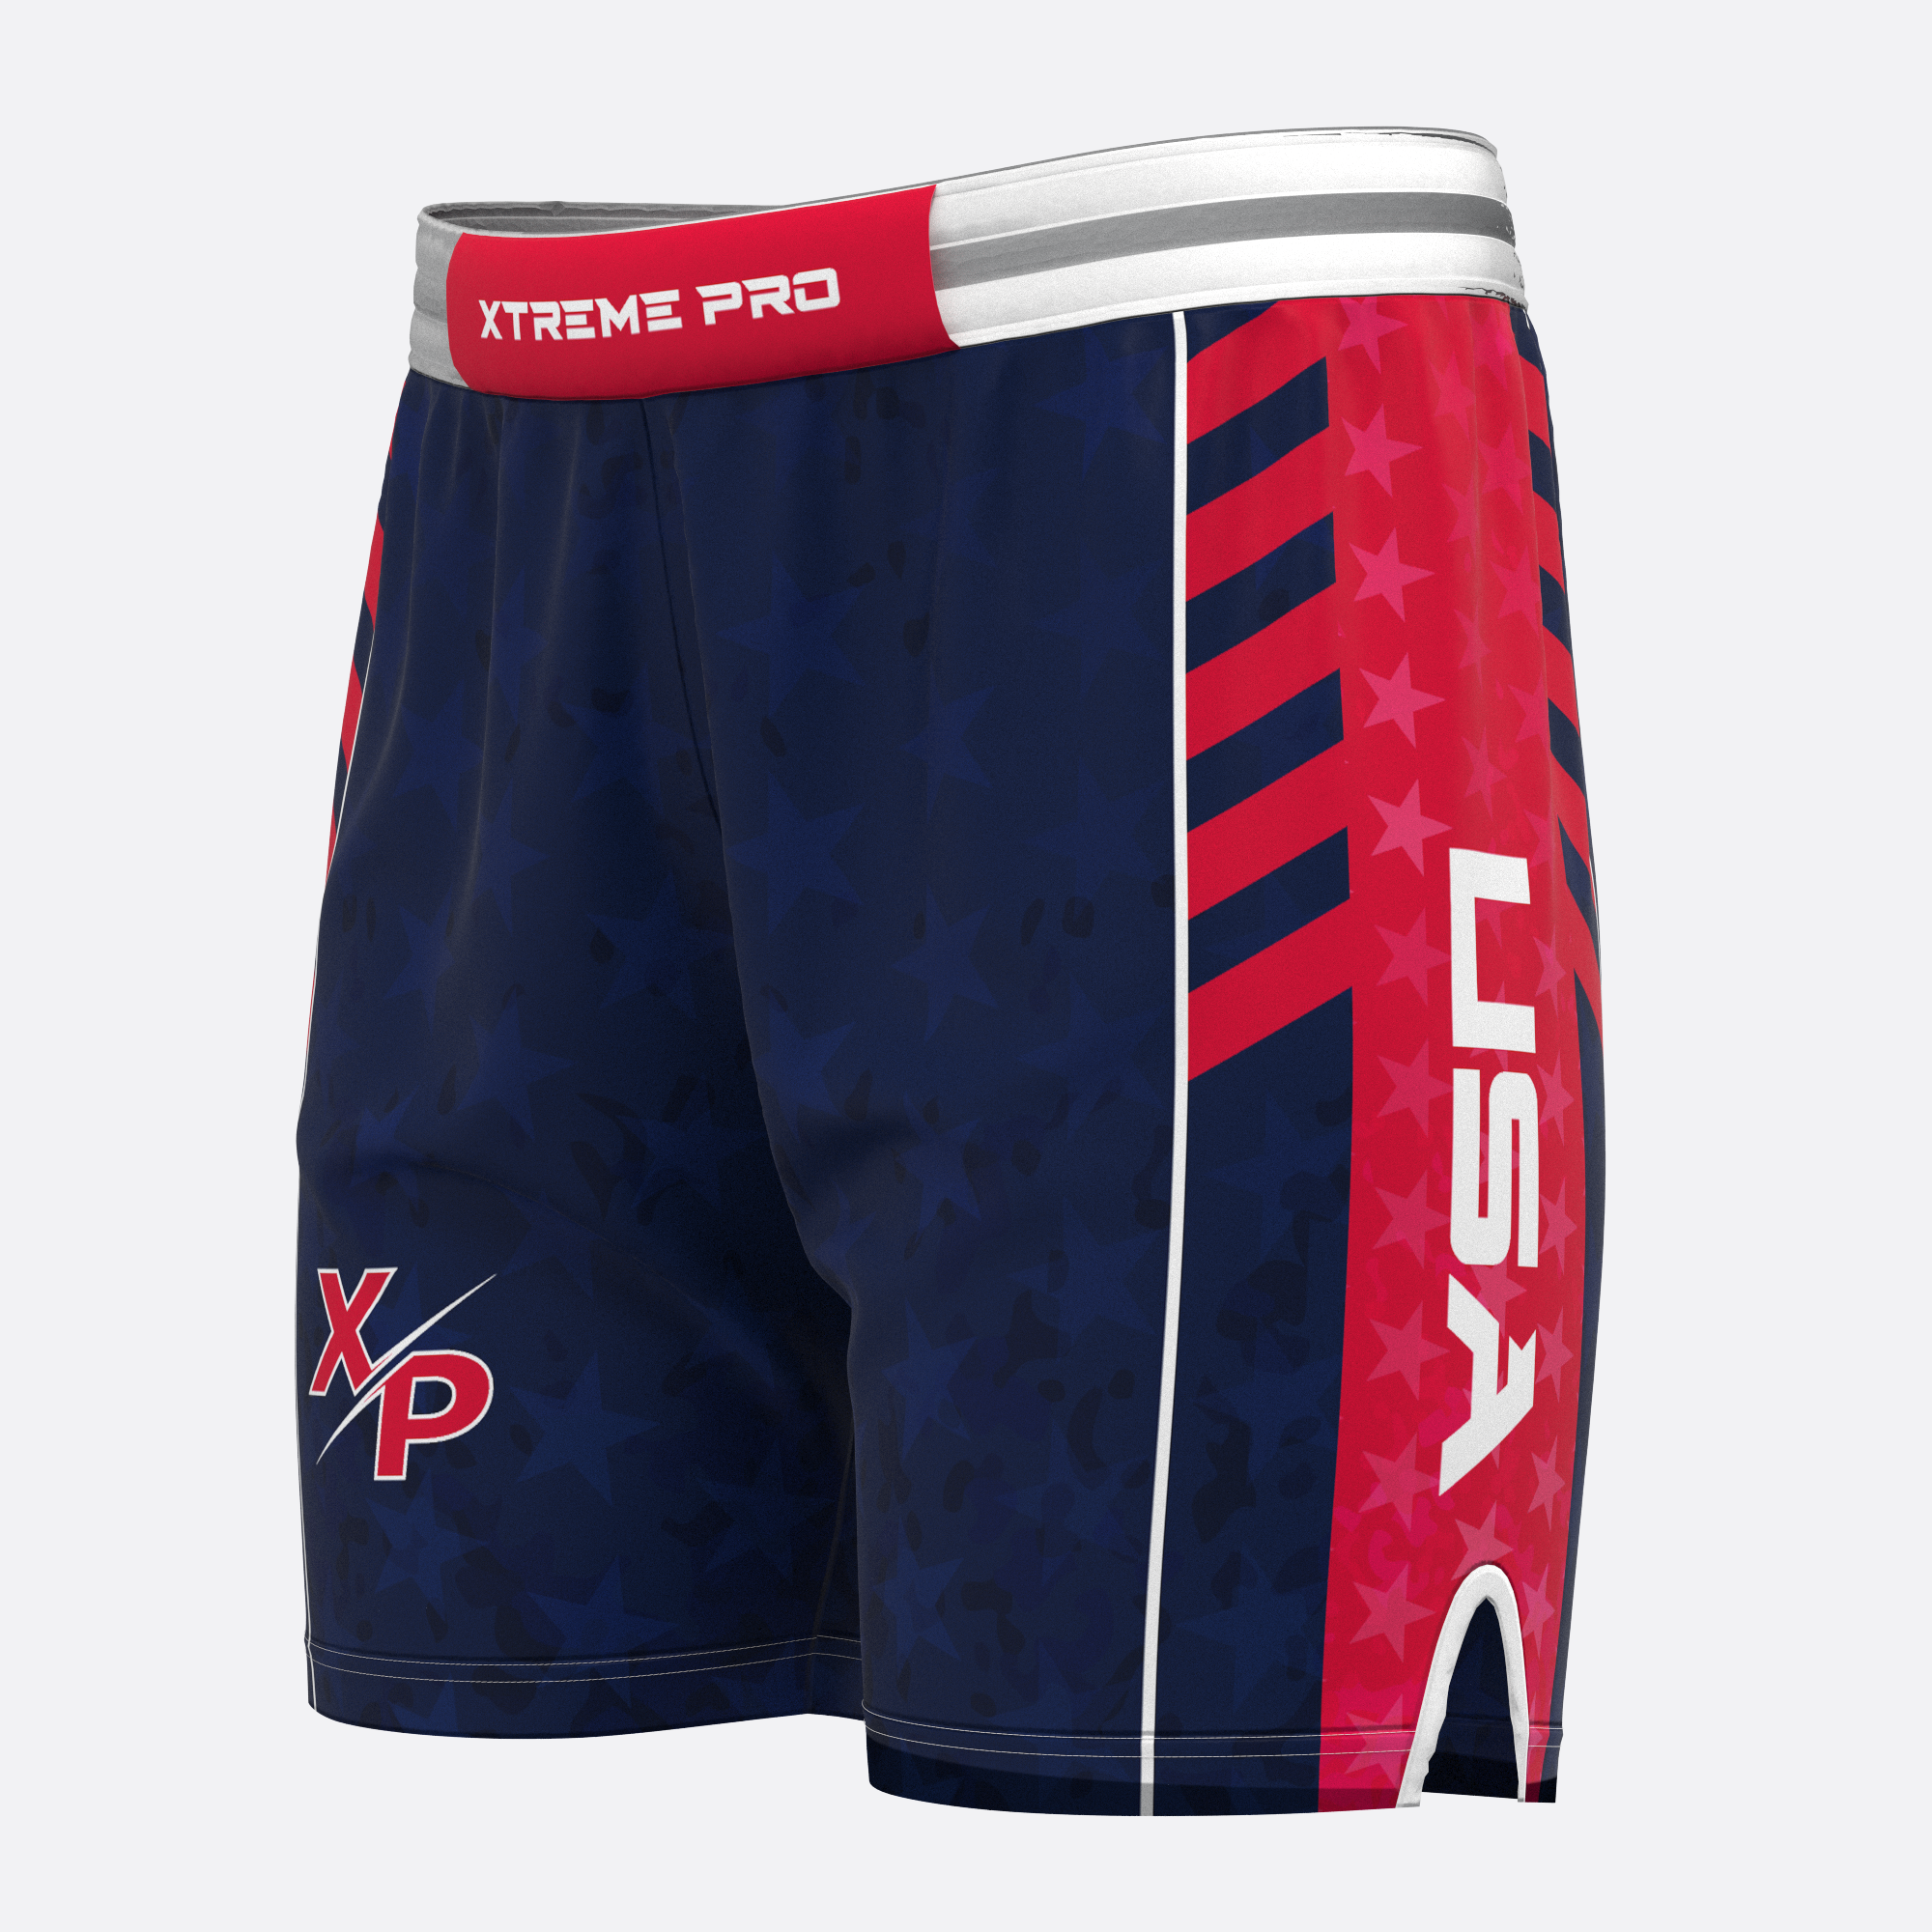 Nationals Fully Sublimated Training Shorts in Blue Xtreme Pro Apparel